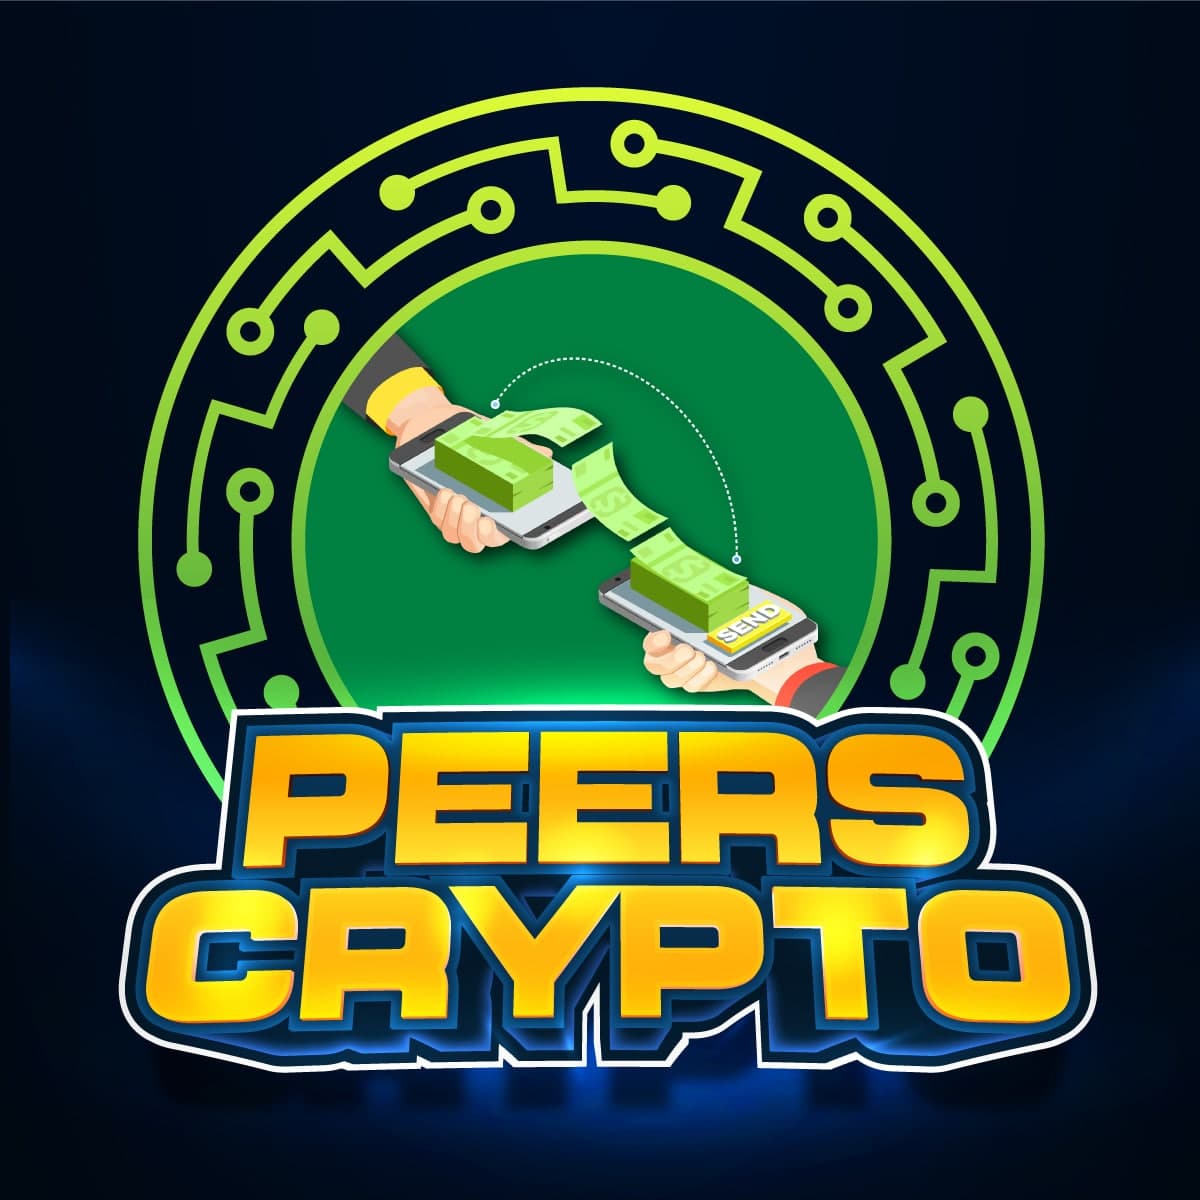 PeersCrypto, a brand-new P2P System Is Opening Up A Decentralized Escrow Mechanism And Launching Their Token On 29th Oct 21.